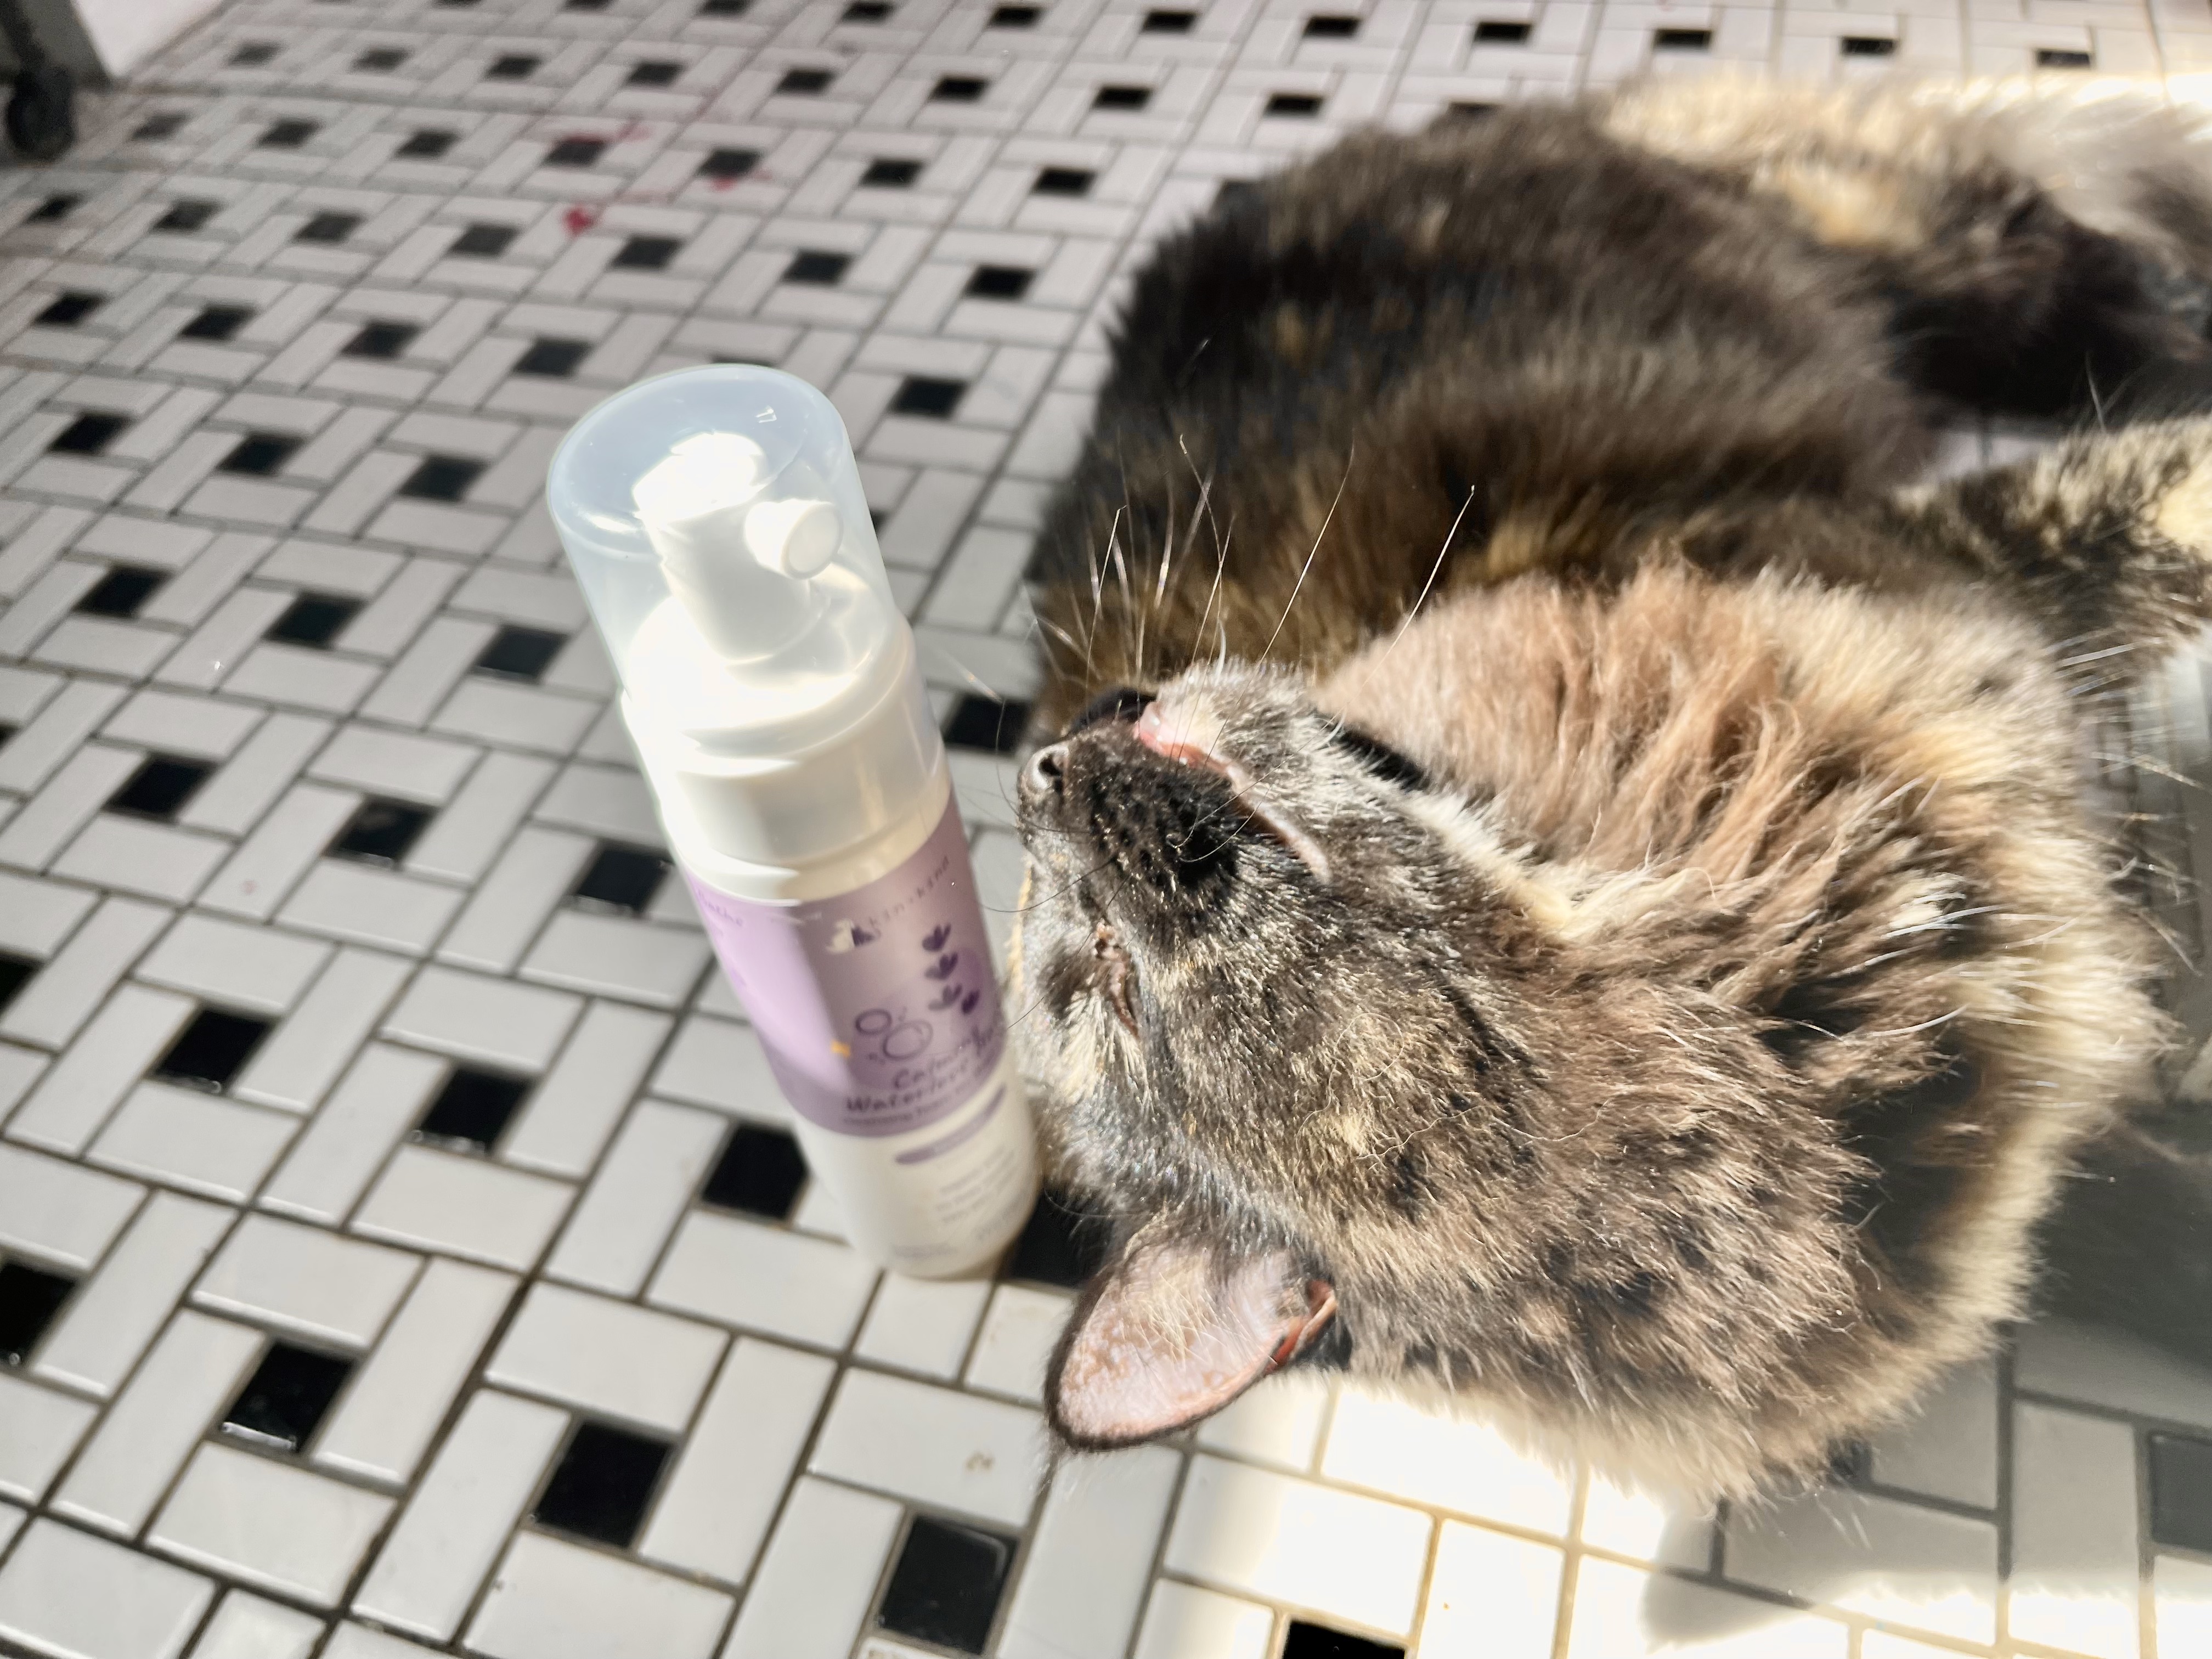 Gigi the cat next to a bottle of kin+kind’s Calming Lavender Waterless Bath for pets